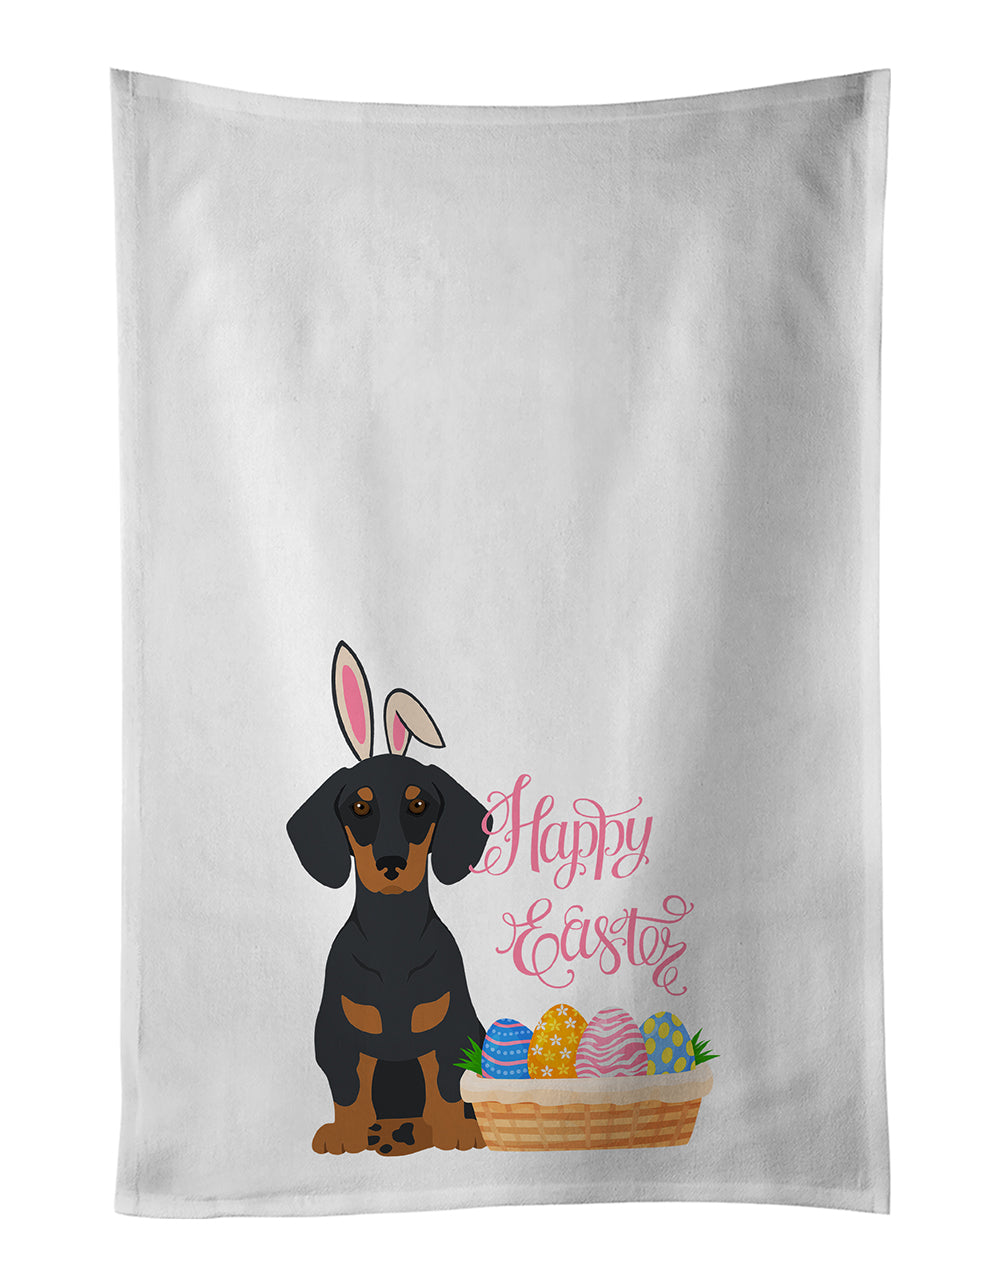 Buy this Black and Tan Dachshund Easter White Kitchen Towel Set of 2 Dish Towels